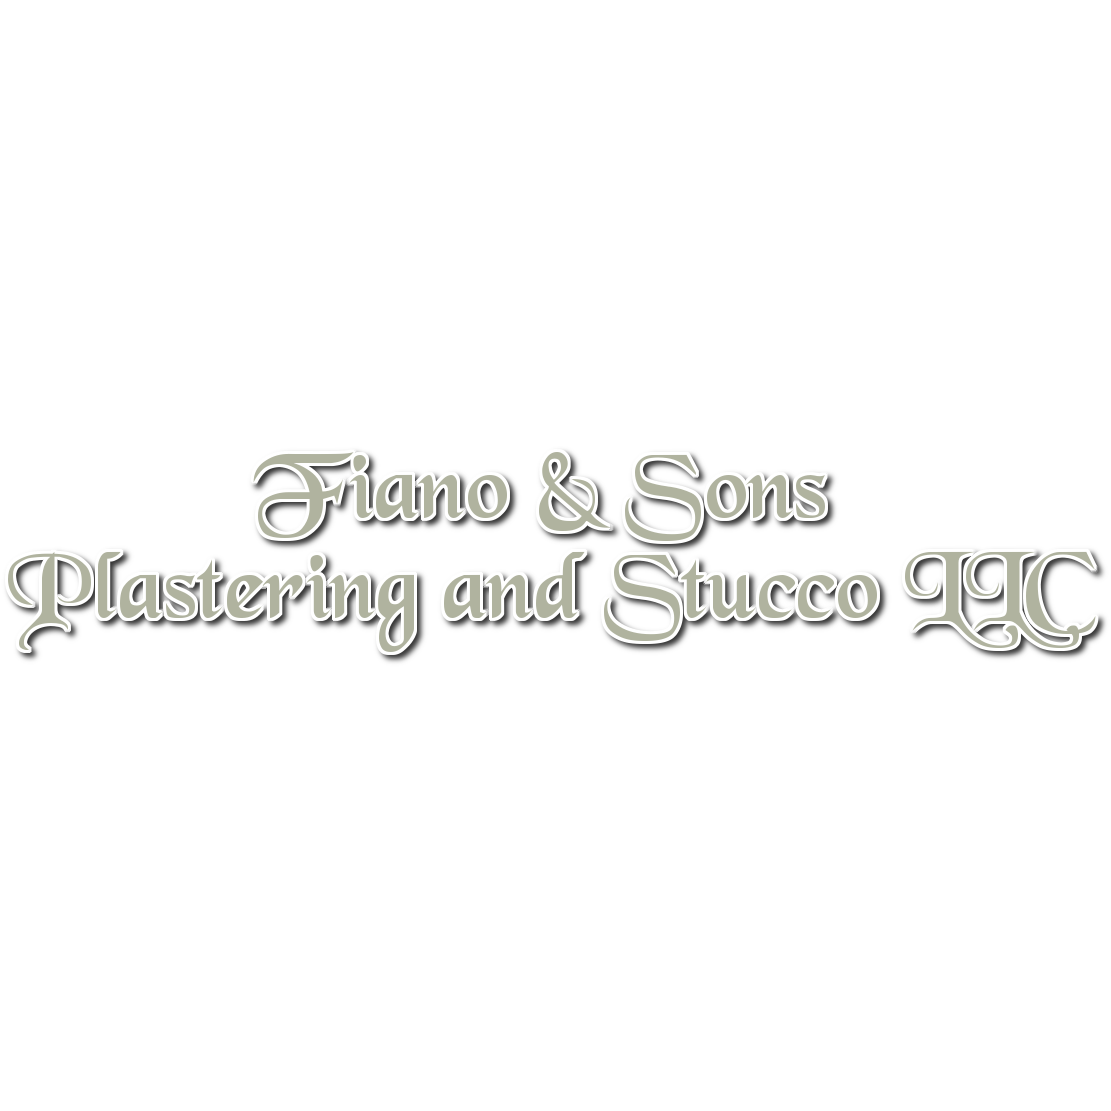 Fiano & Sons Plastering and Stucco LLC